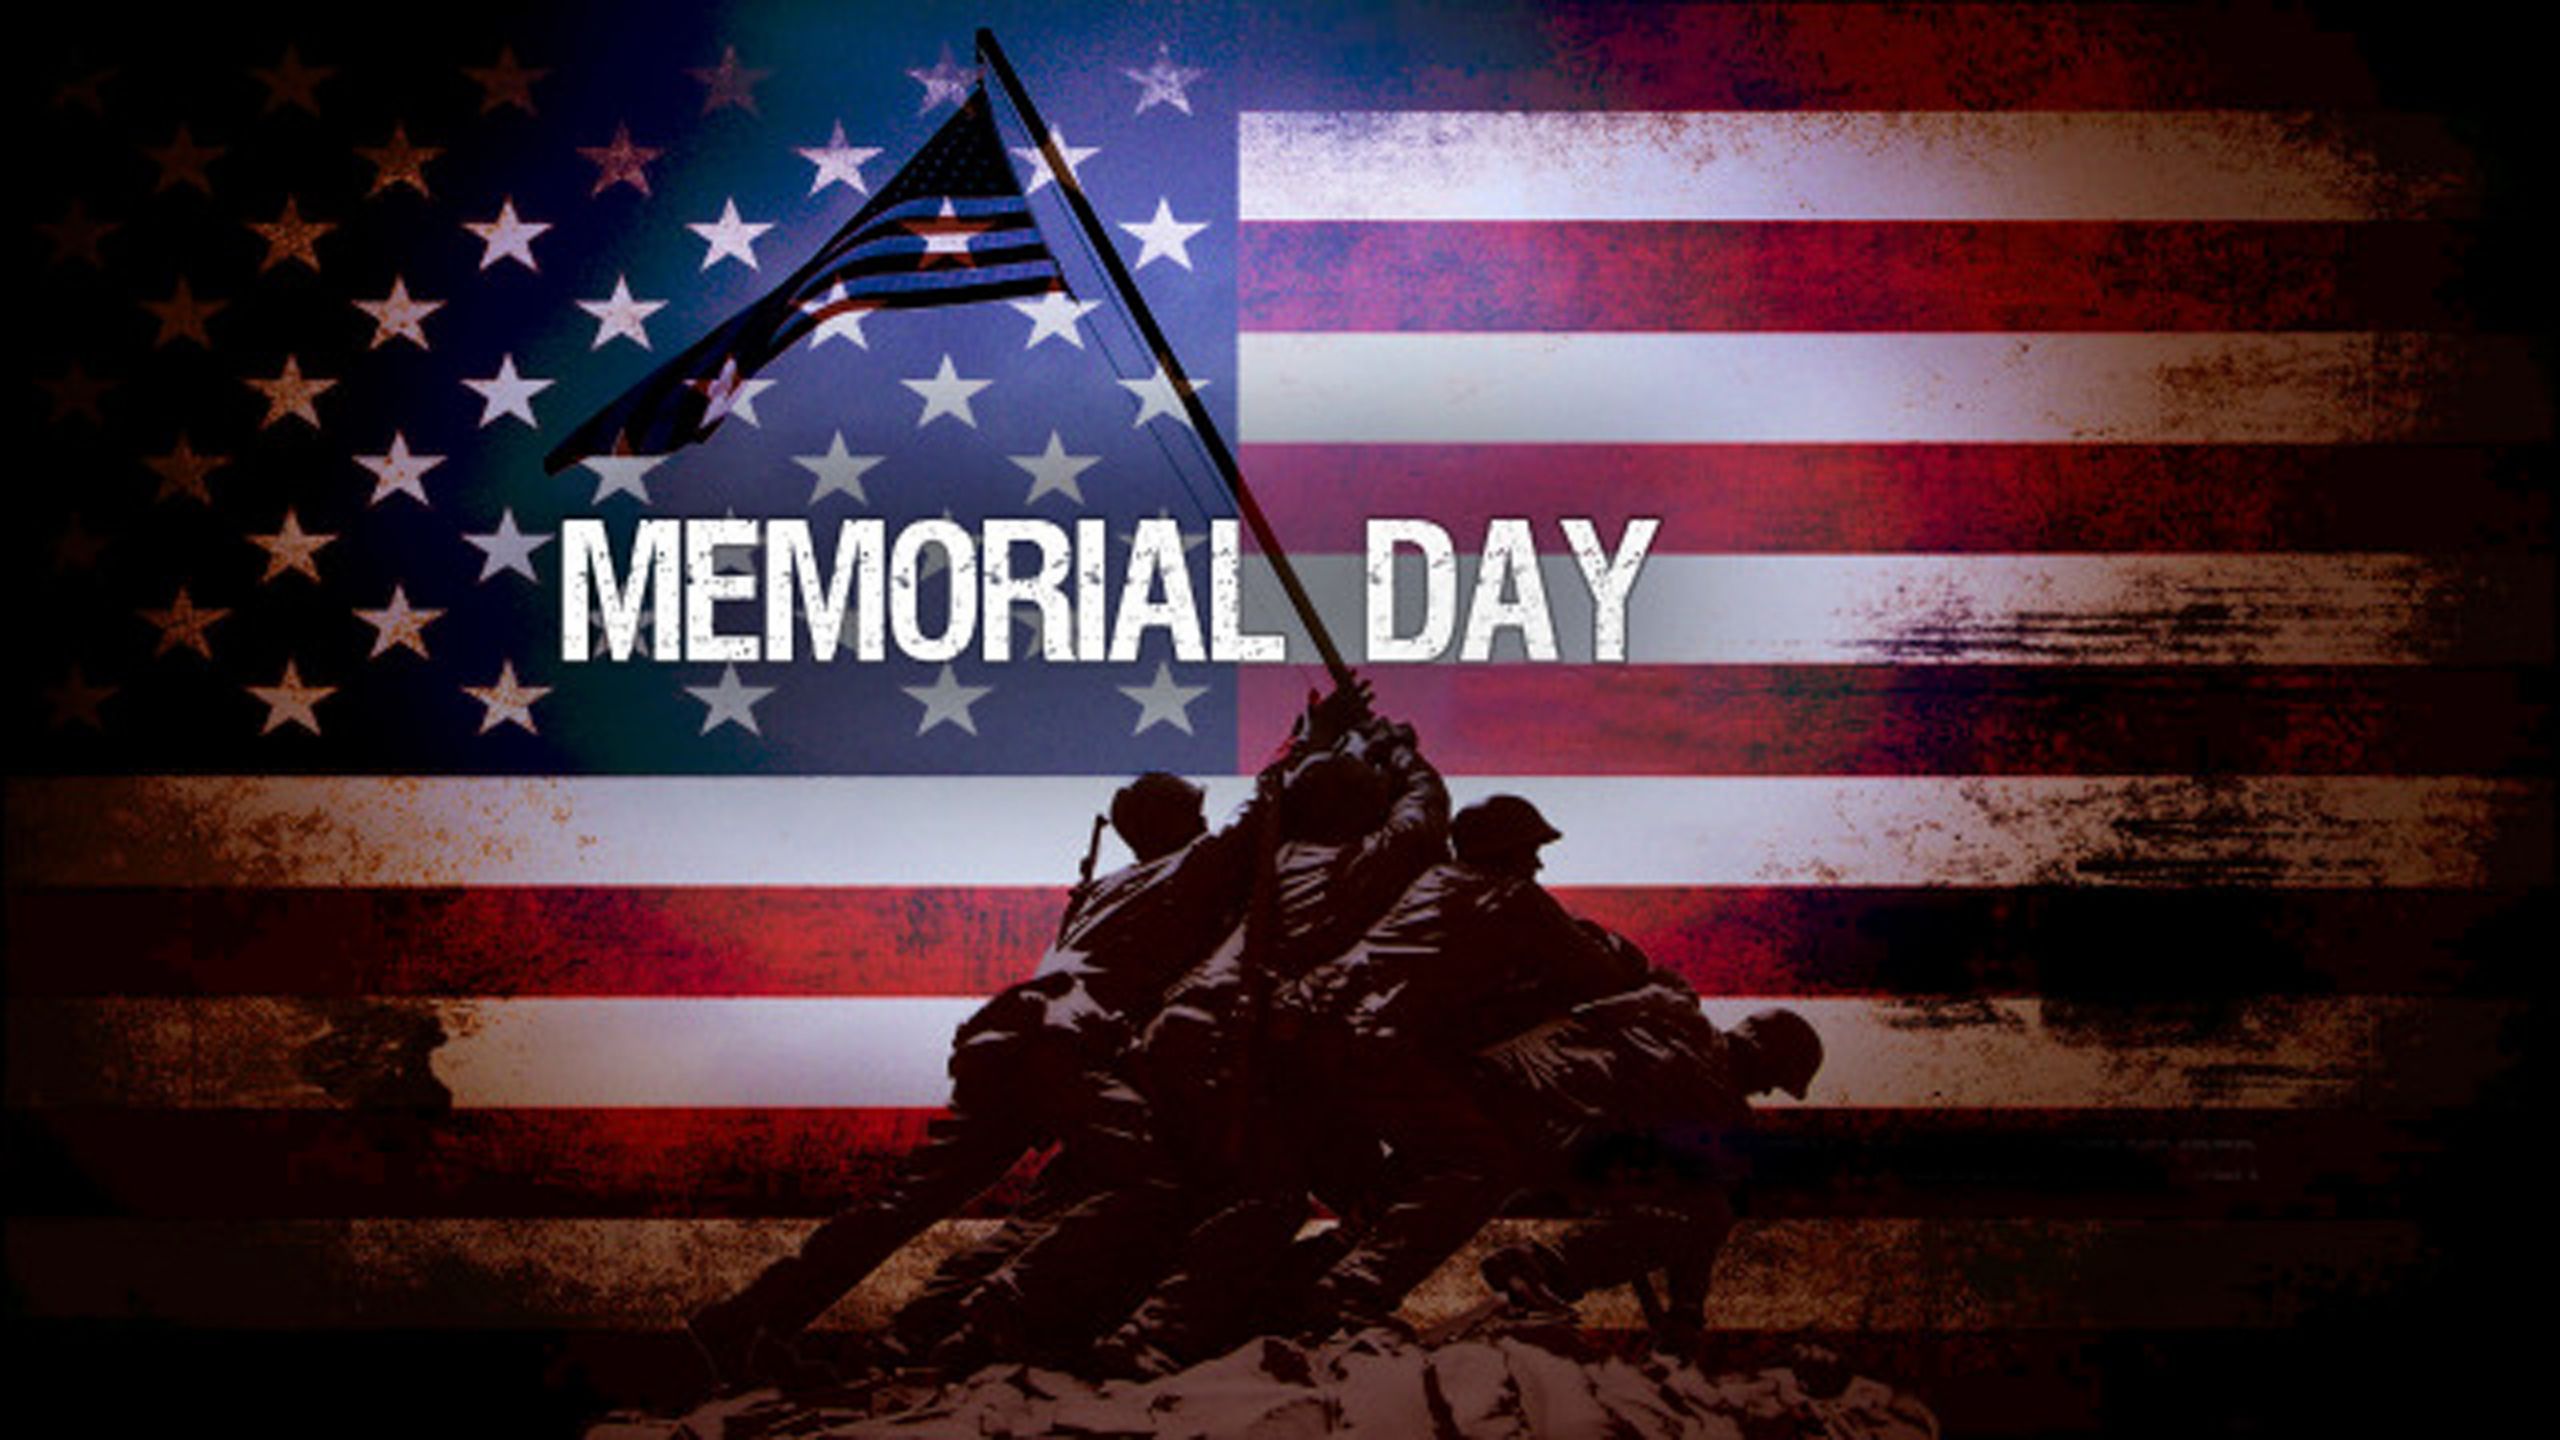 Inspirational Quotes For Memorial Day
 Remembrance Inspirational Quotes QuotesGram